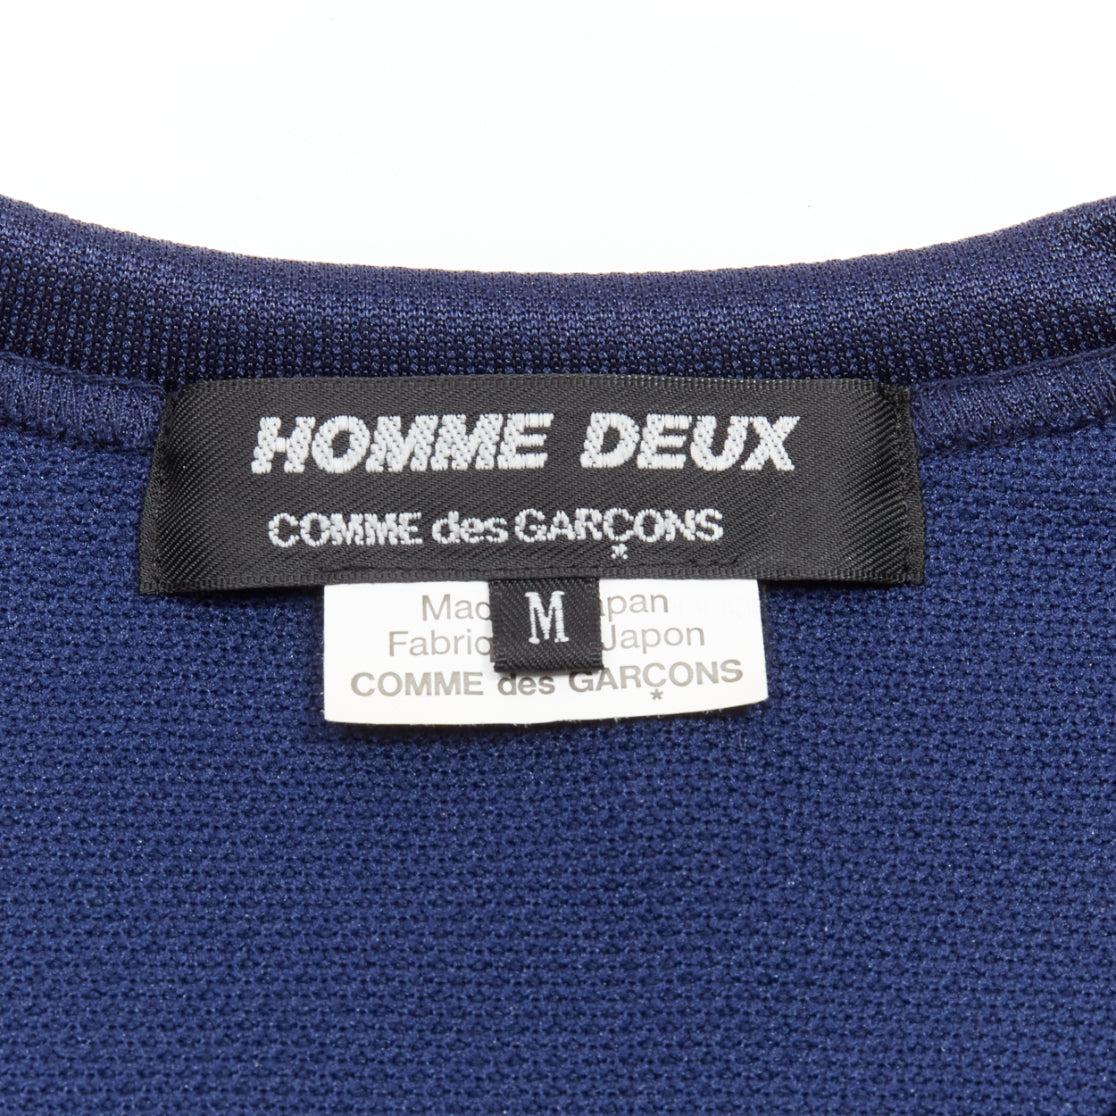 COMME DES GARCONS Homme Deux 2018 yellow rib navy football jersey sweatshirt M For Sale 3